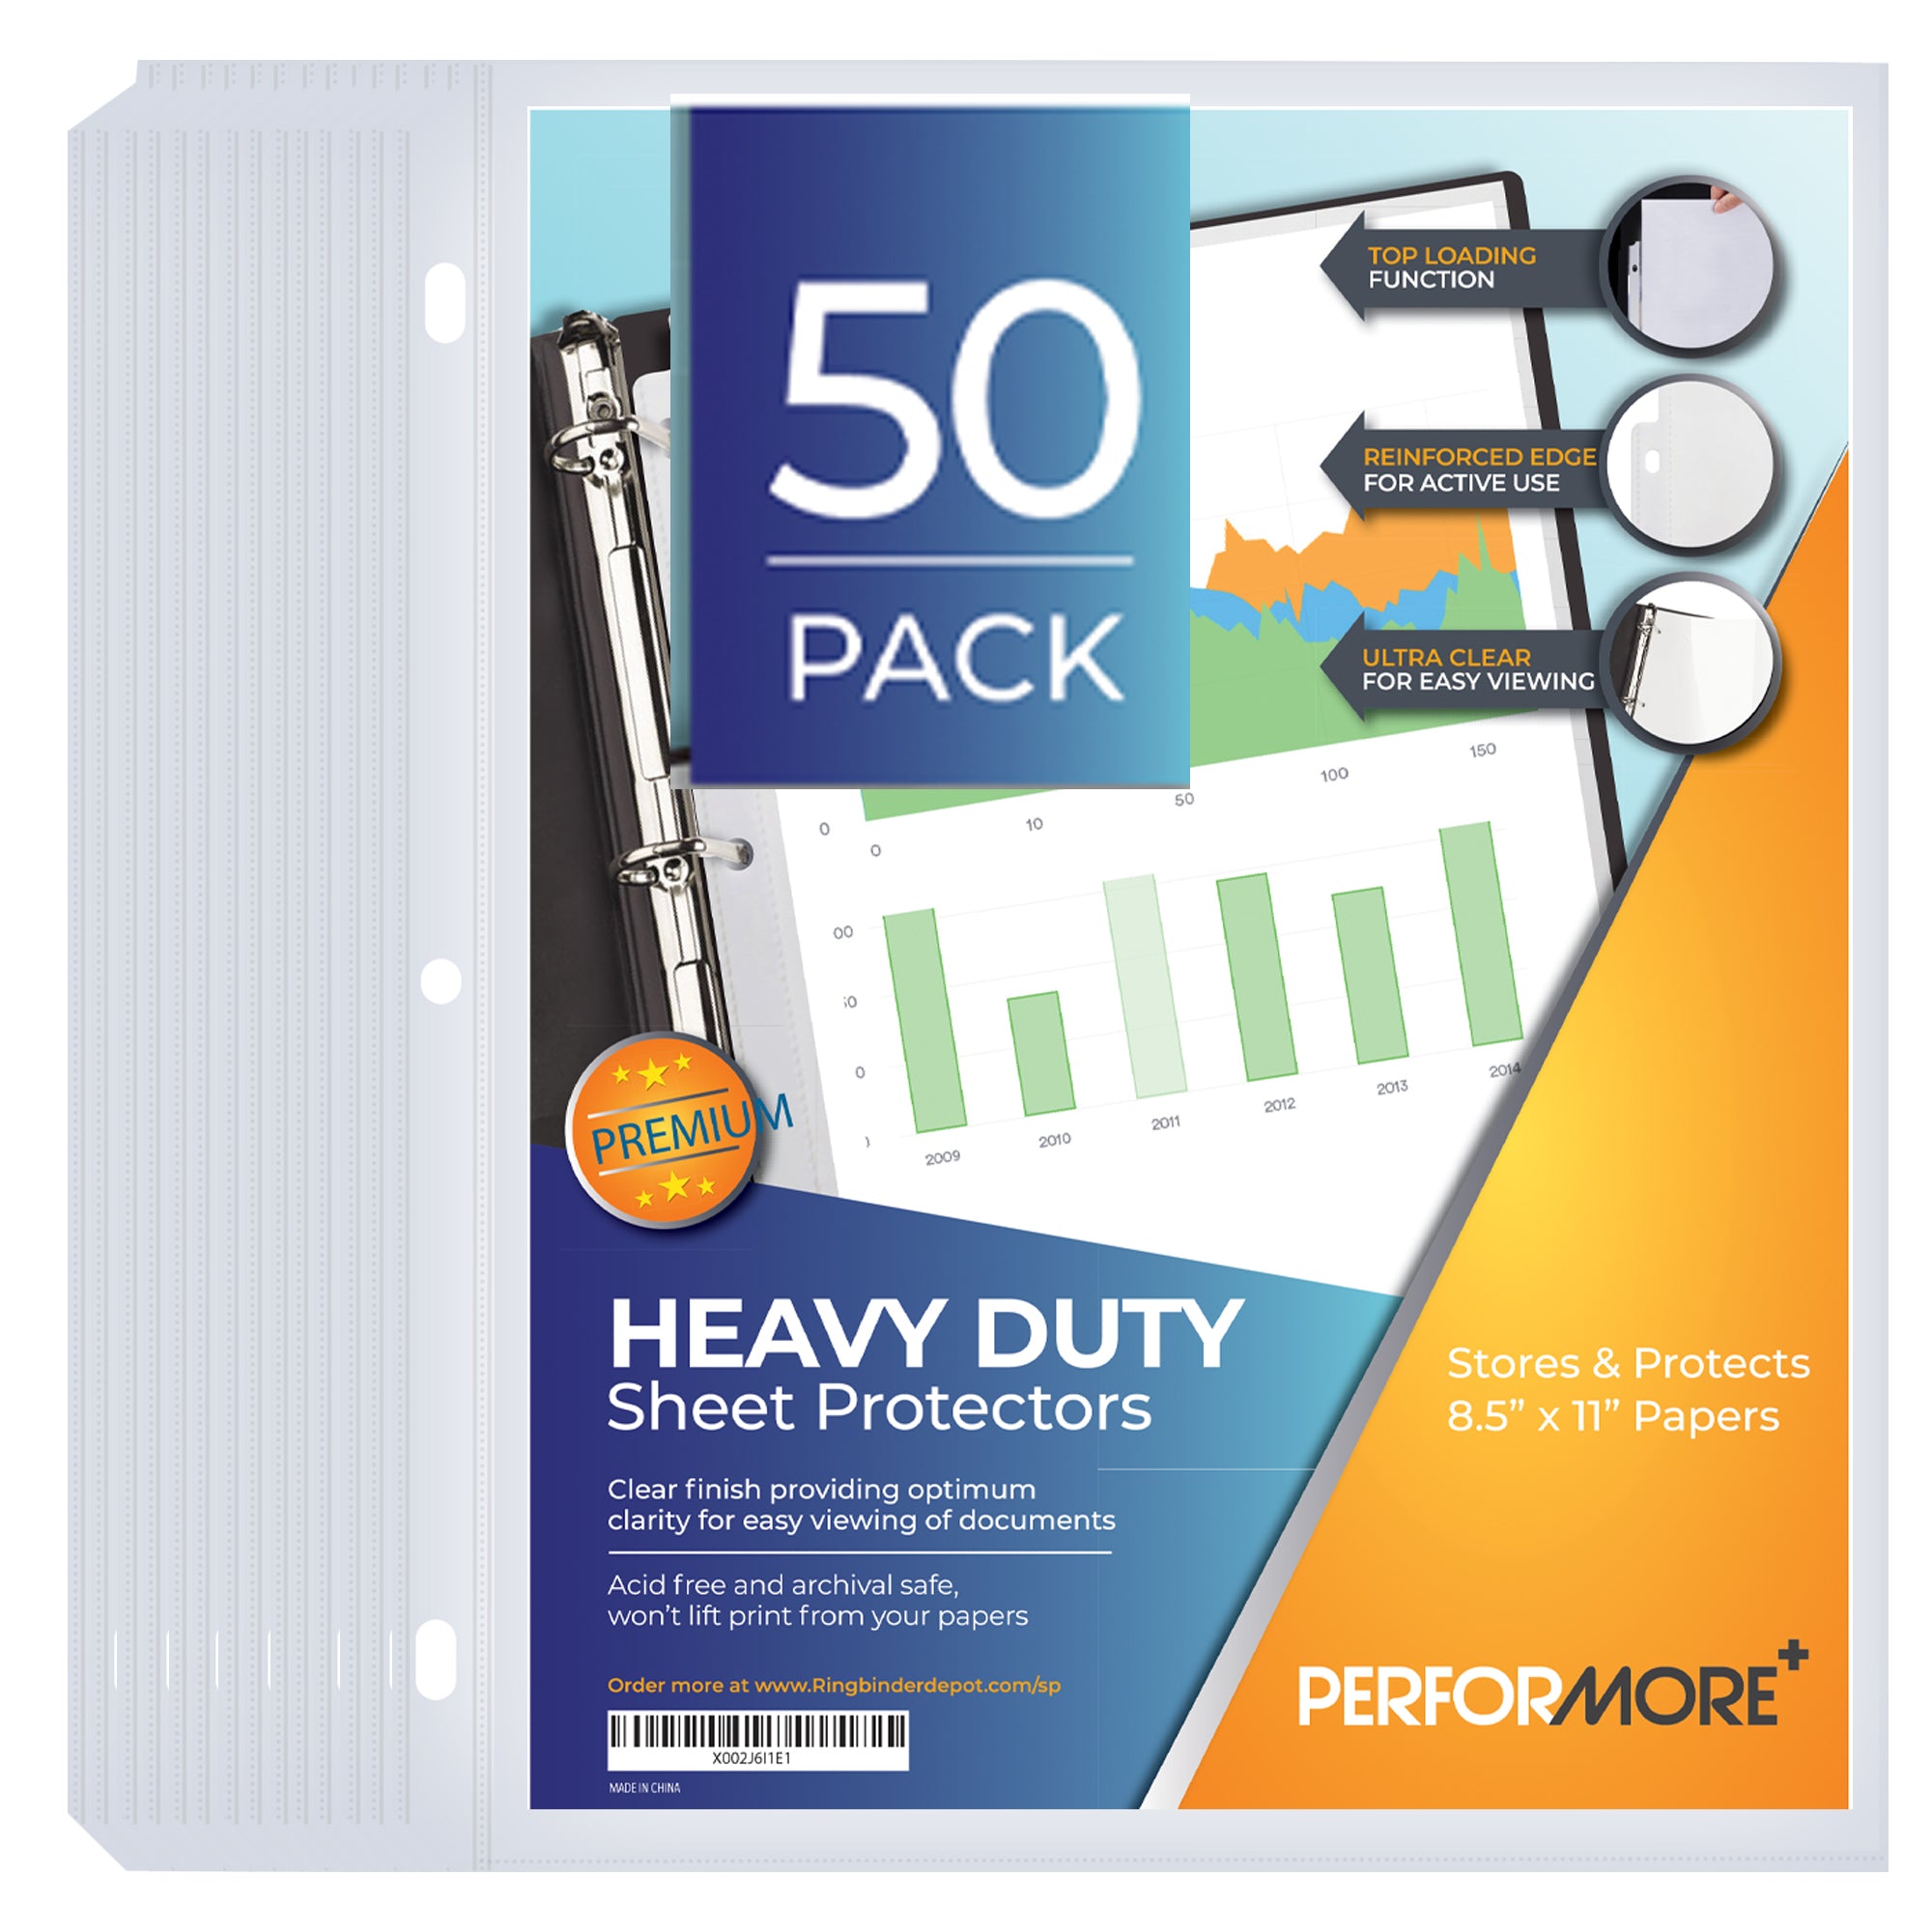 Heavy Duty Clear Sheet Protectors, 8.5 inch x 11 inch, 150 Pack, Top Load,Reinforced Holes, Acid-Free/Archival Safe